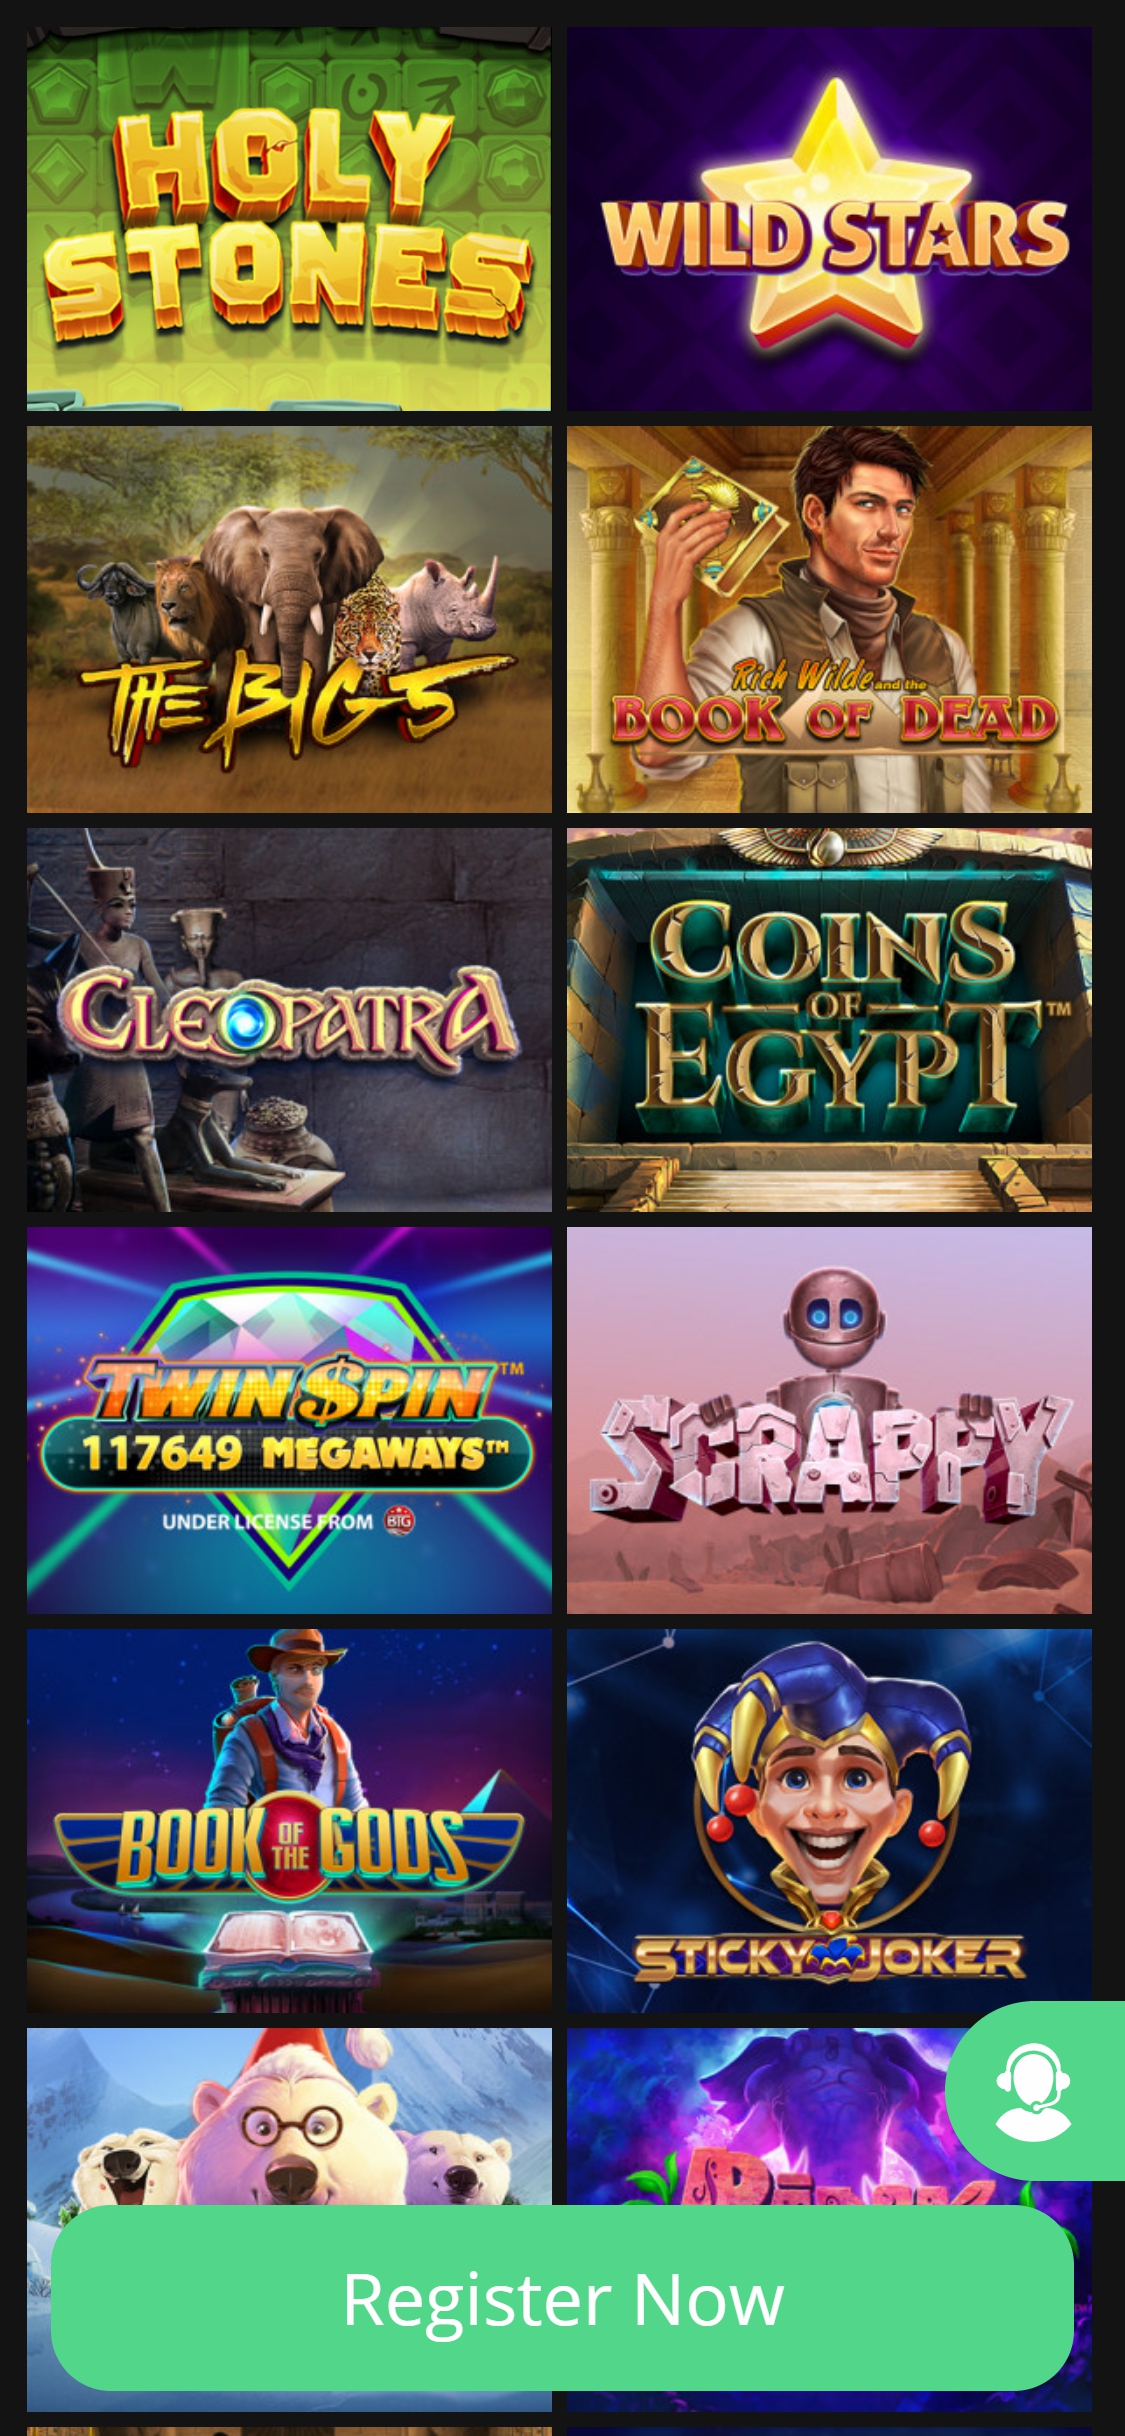 One Casino Mobile Games Review